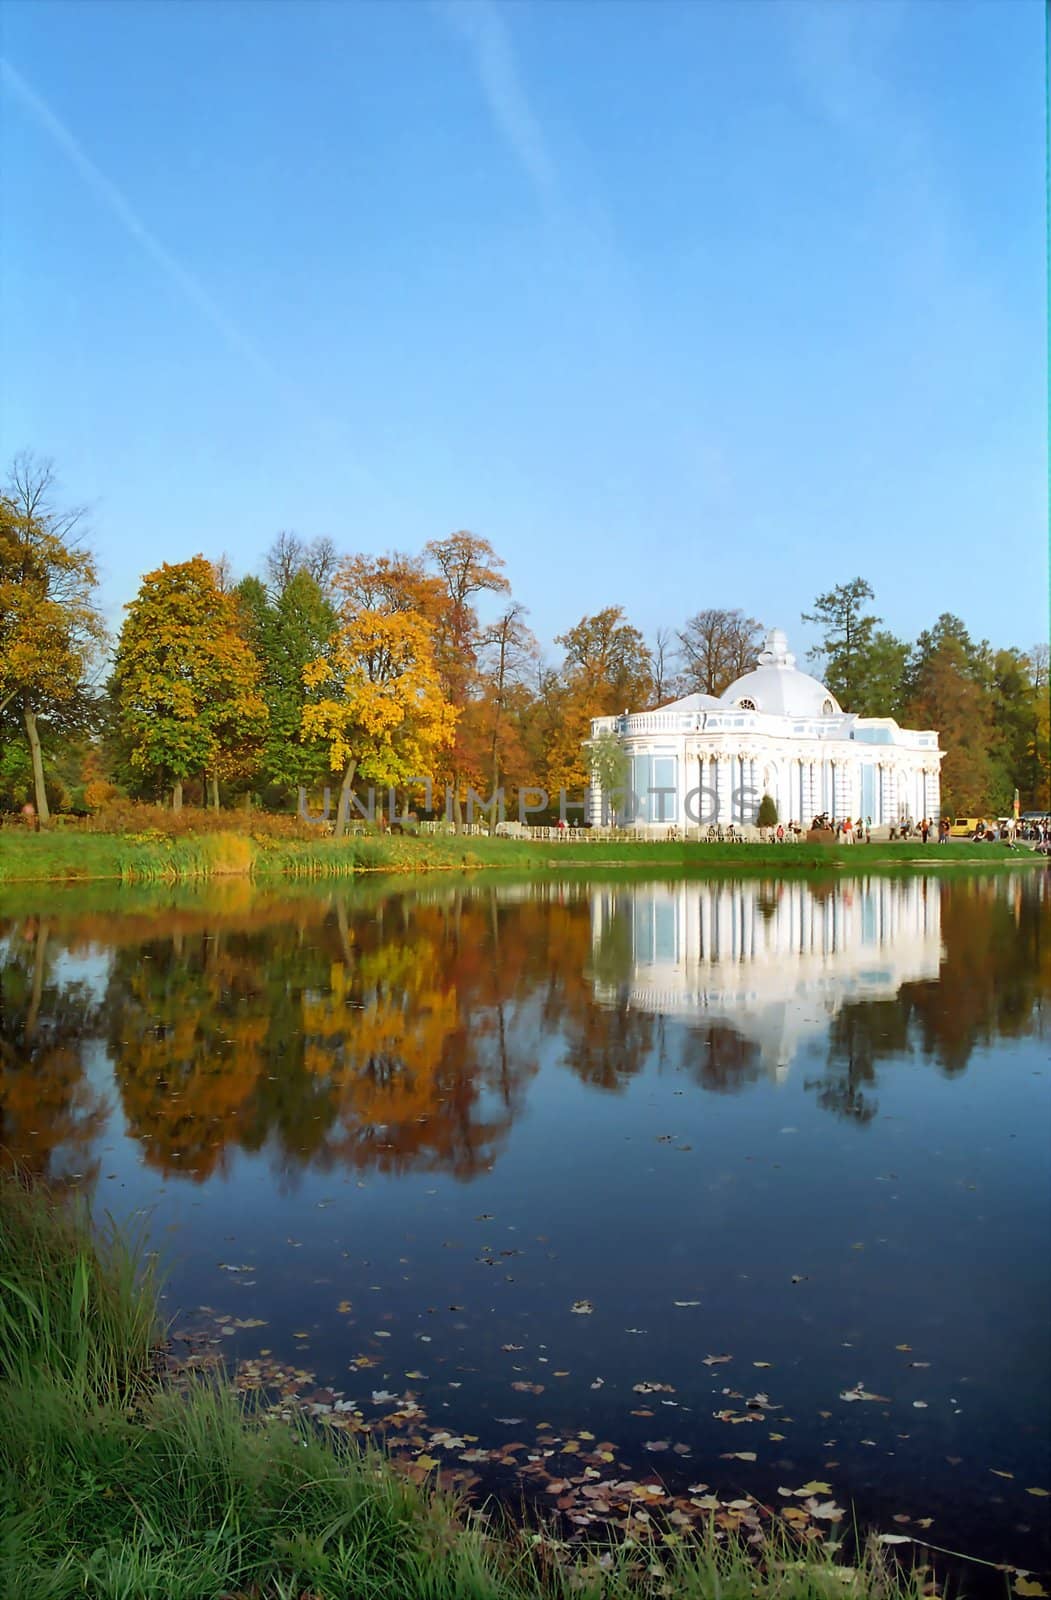 Classical building near the pond in autumn day vertical